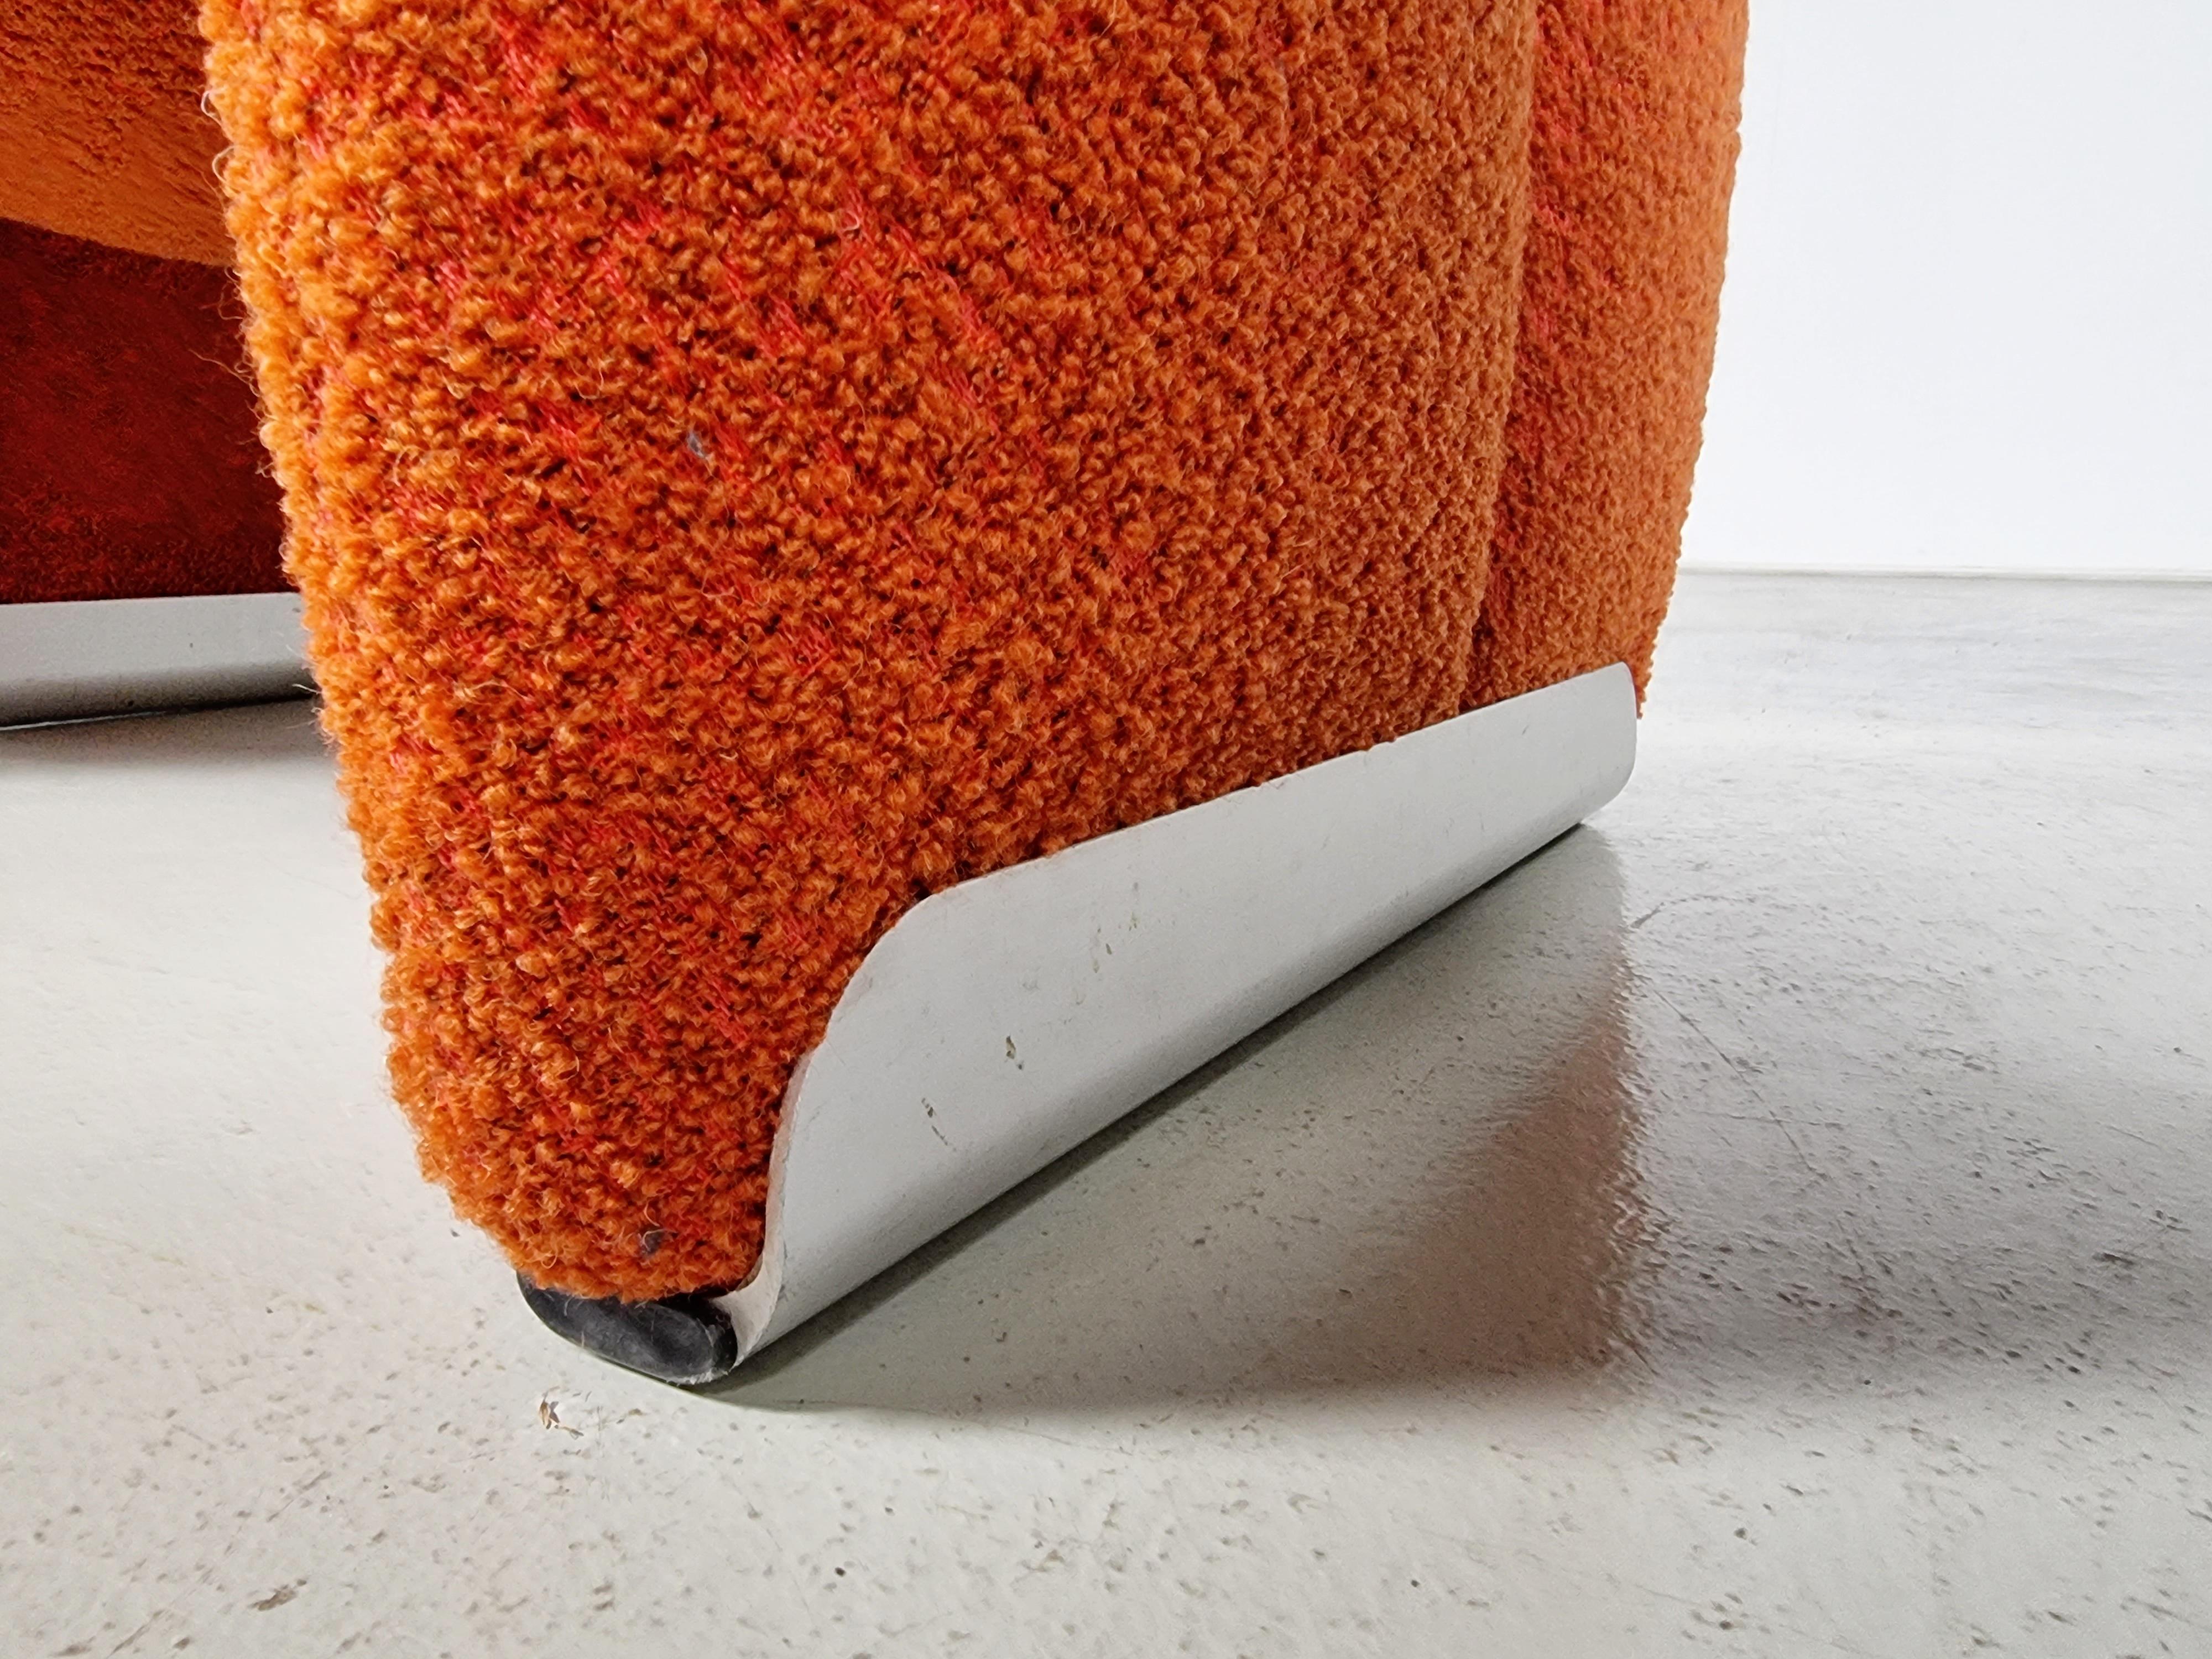 F598 Groovy 'M' Chair in orange/red boucle by Pierre Paulin for Artifort, 1980s For Sale 1